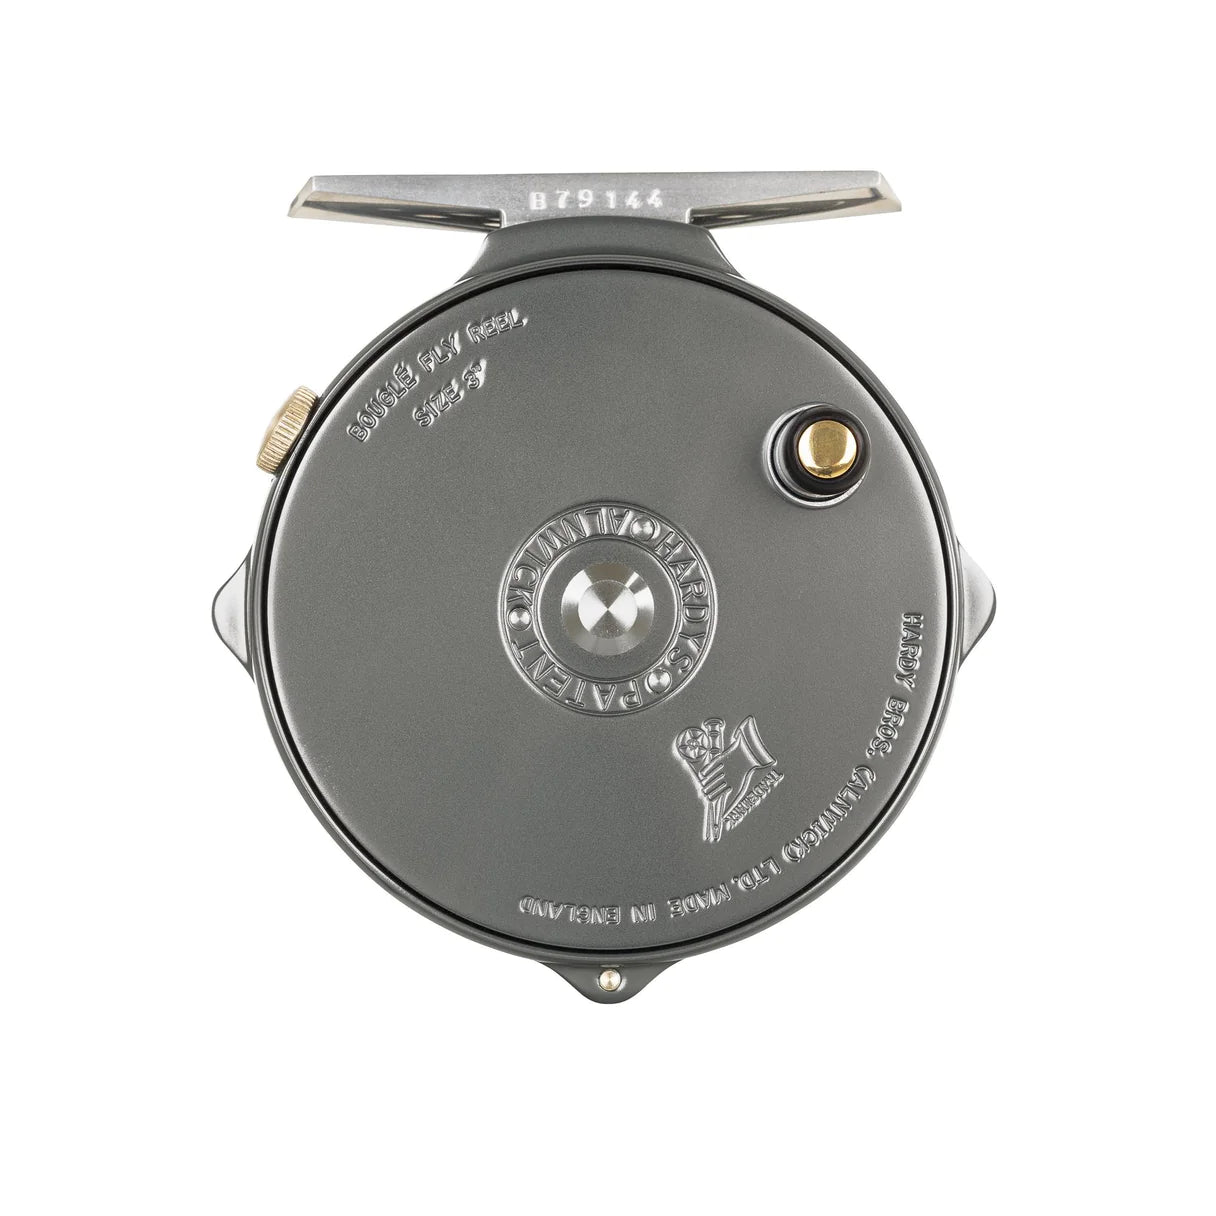 Hardy Bougle 3 Fly Reel For Sale - Classic Design